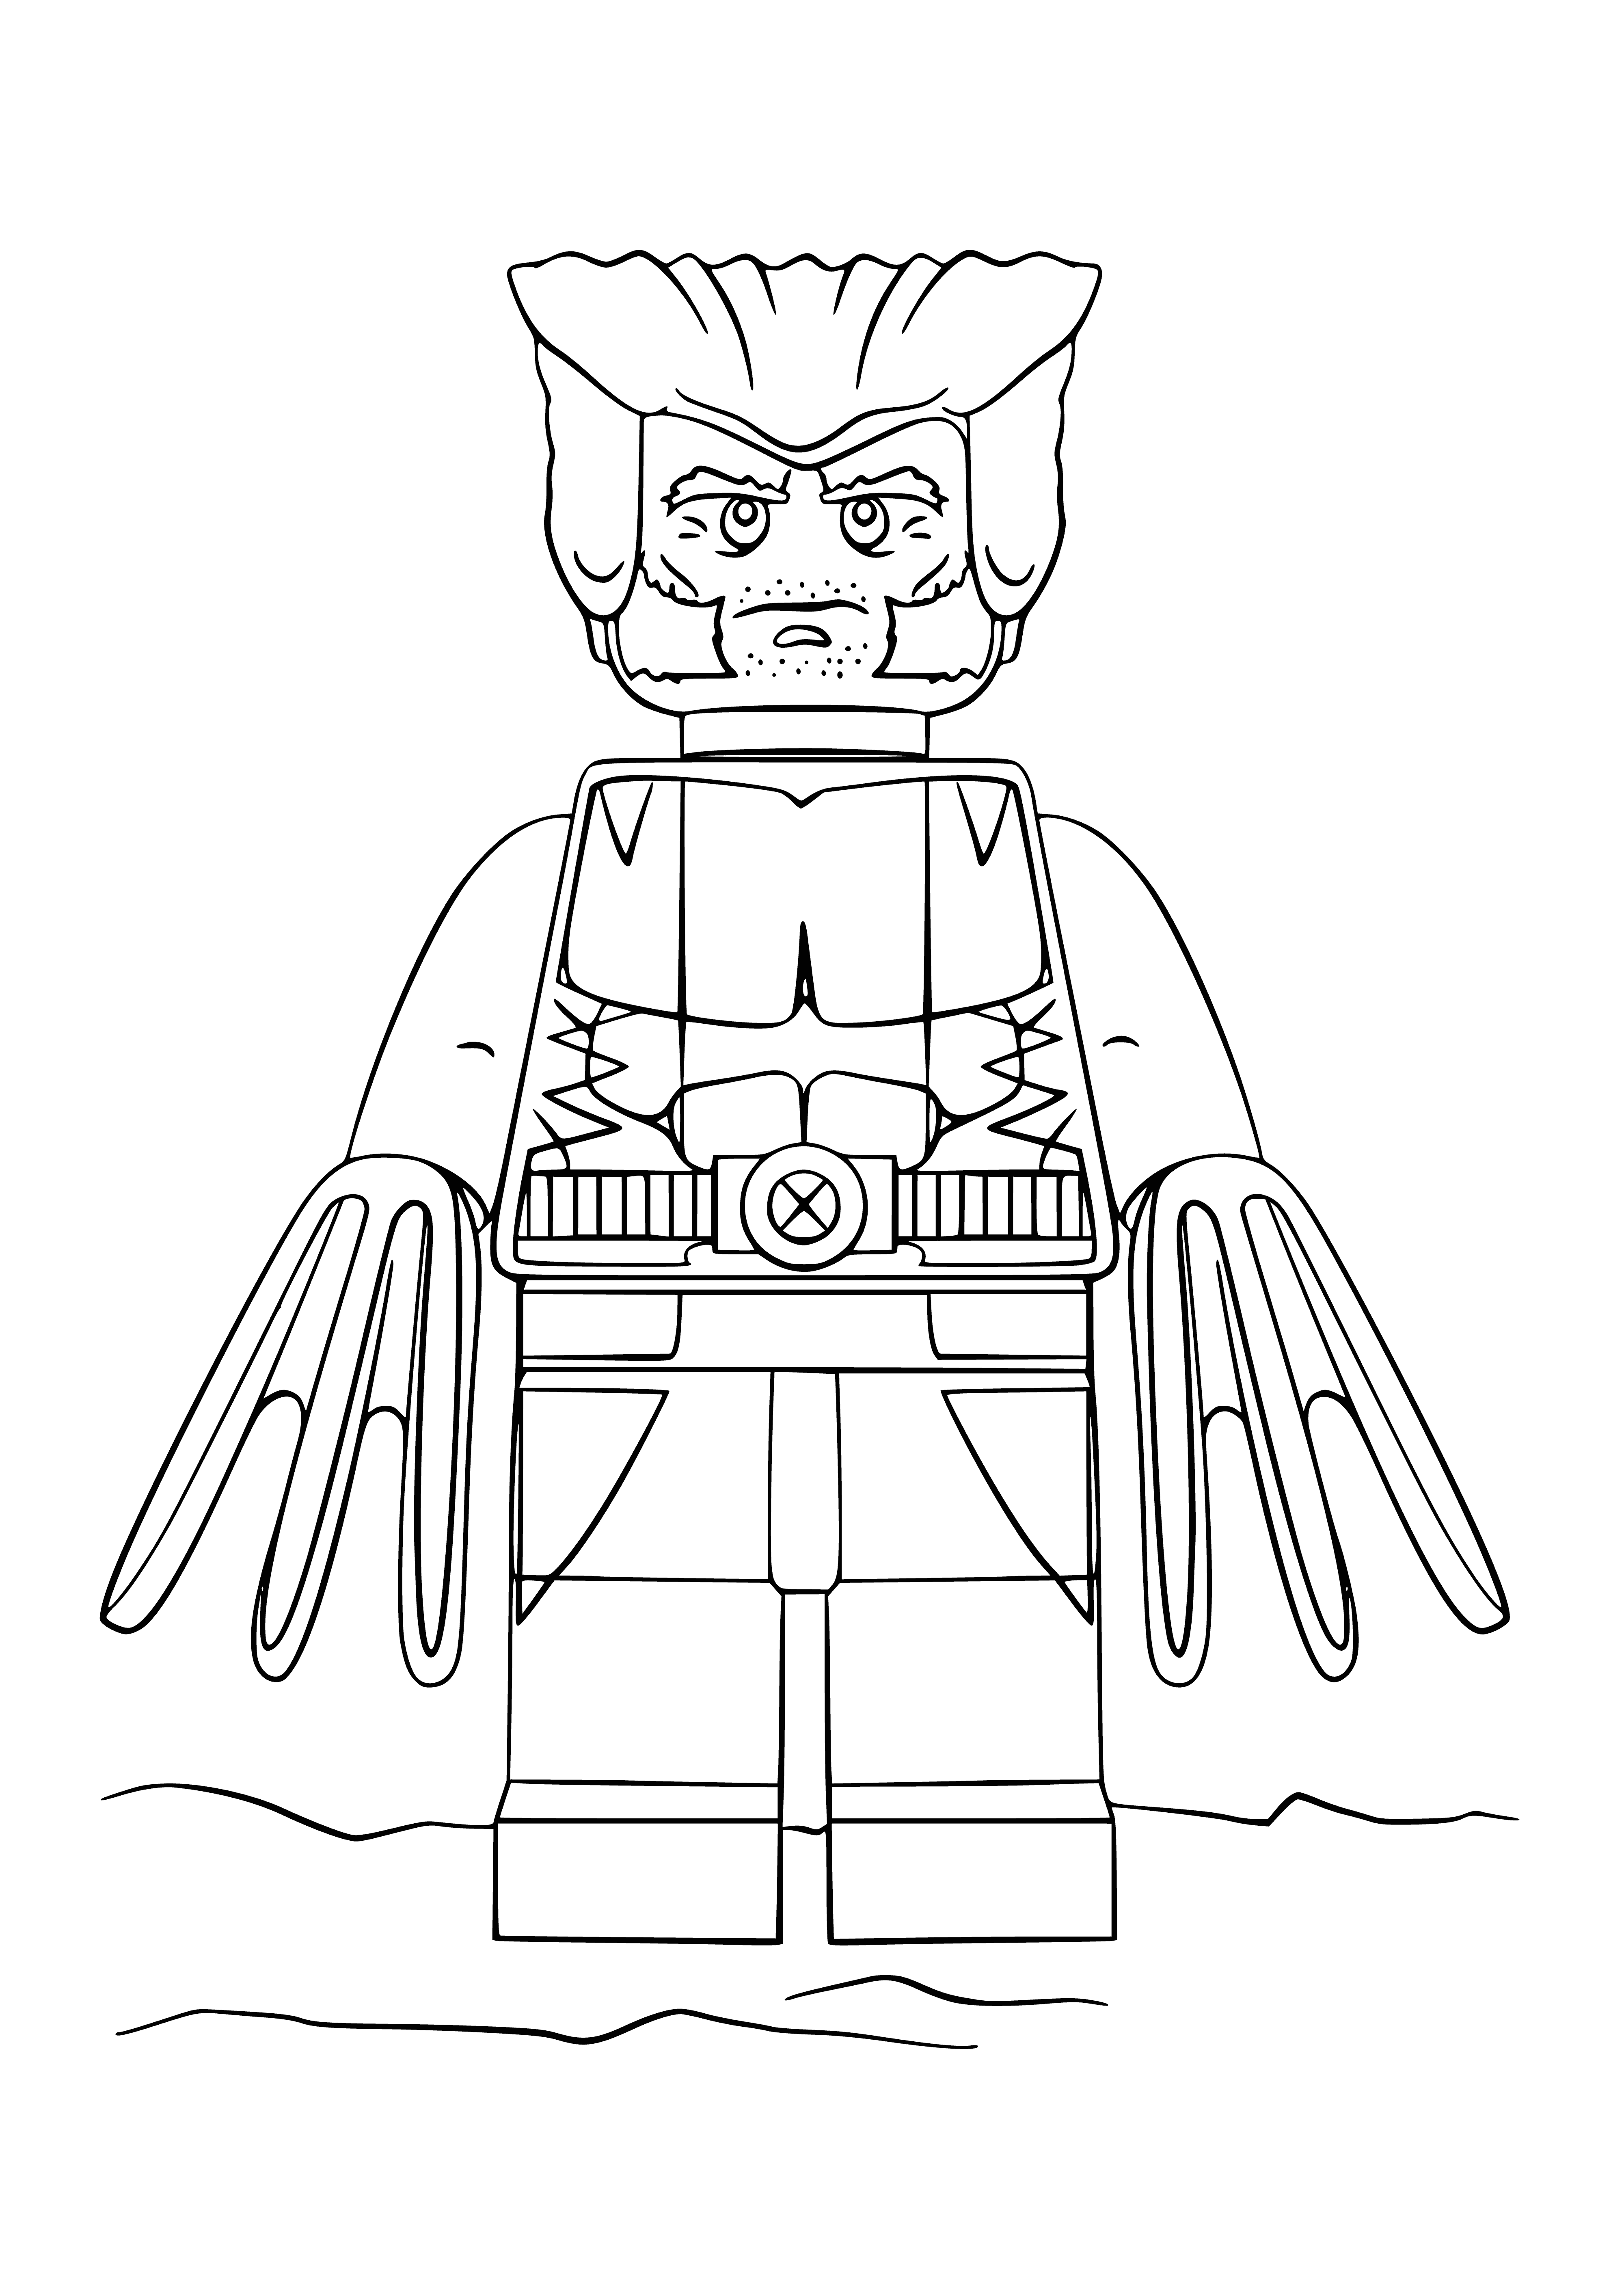 Wolverine coloring page